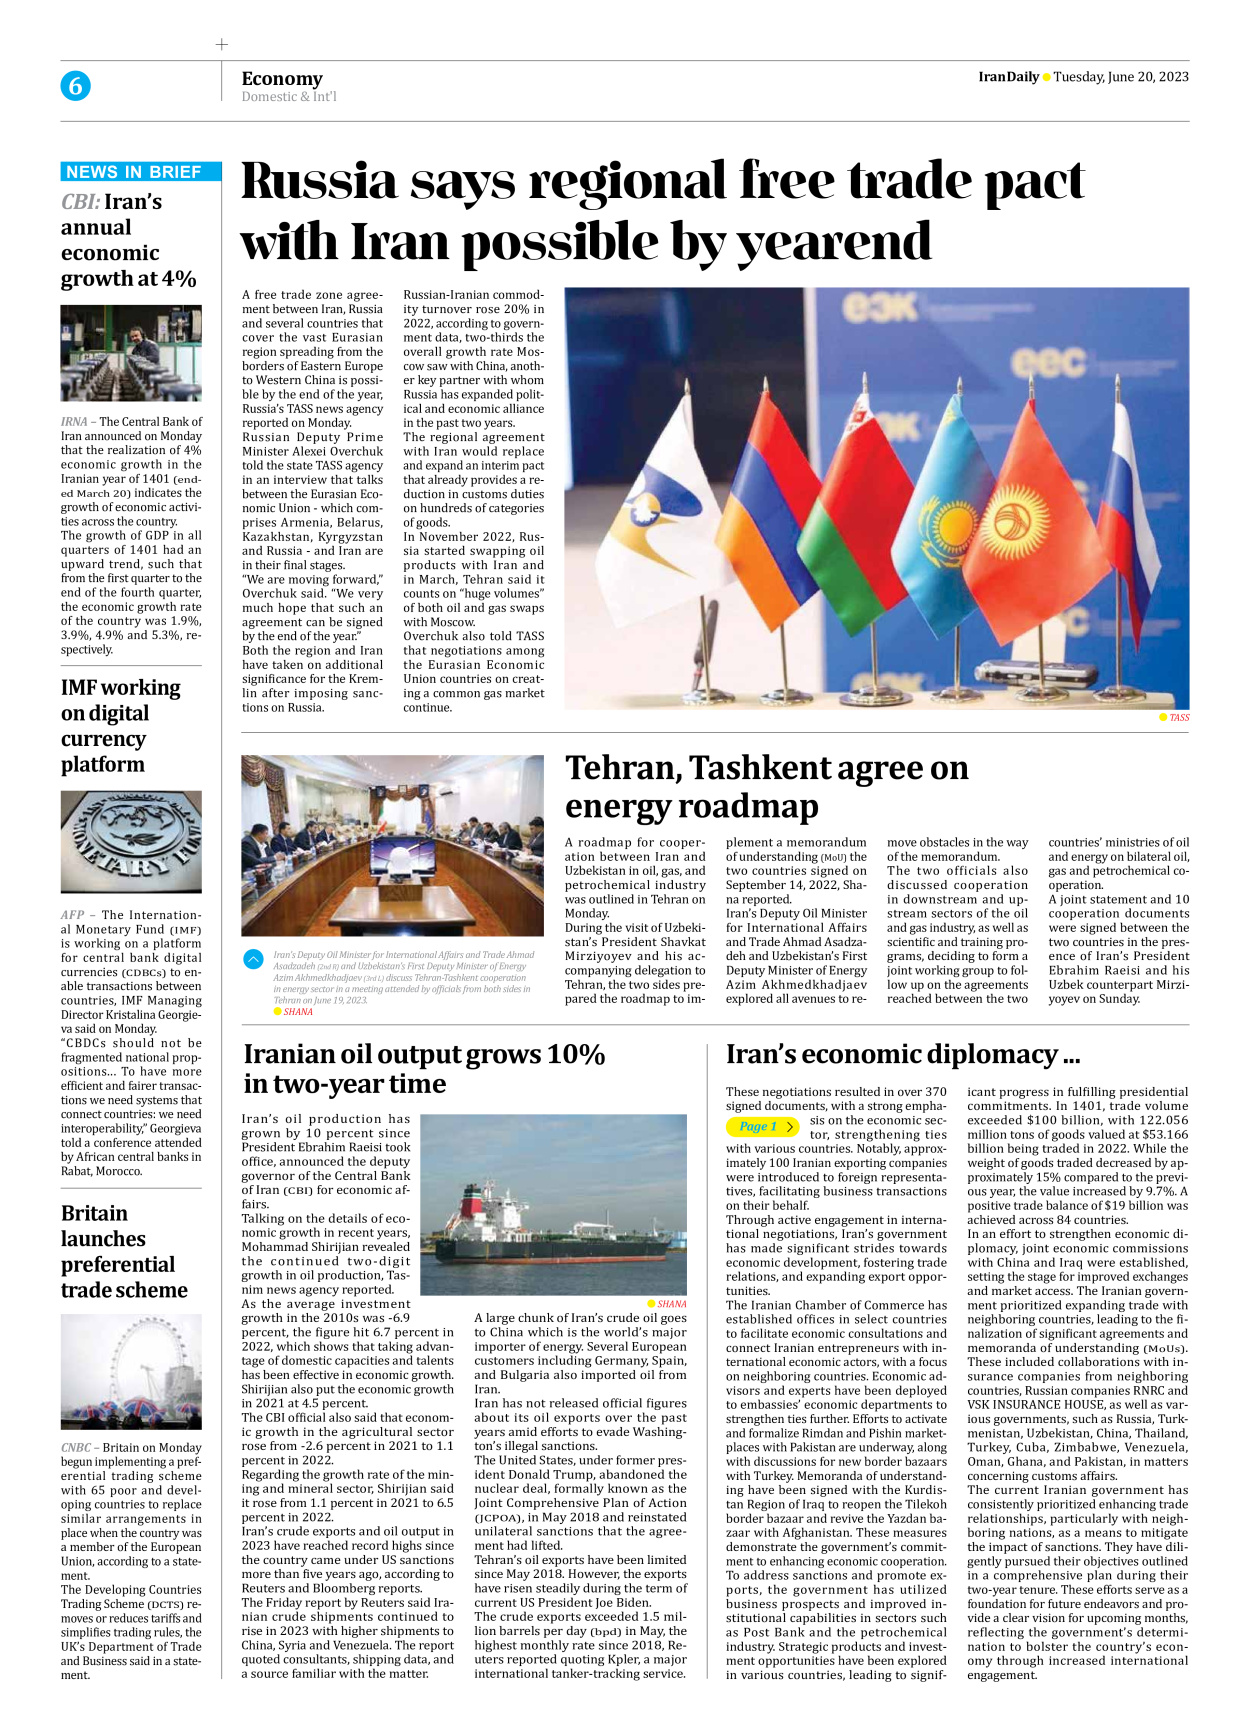 Iran Daily - Number Seven Thousand Three Hundred and Nineteen - 20 June 2023 - Page 6